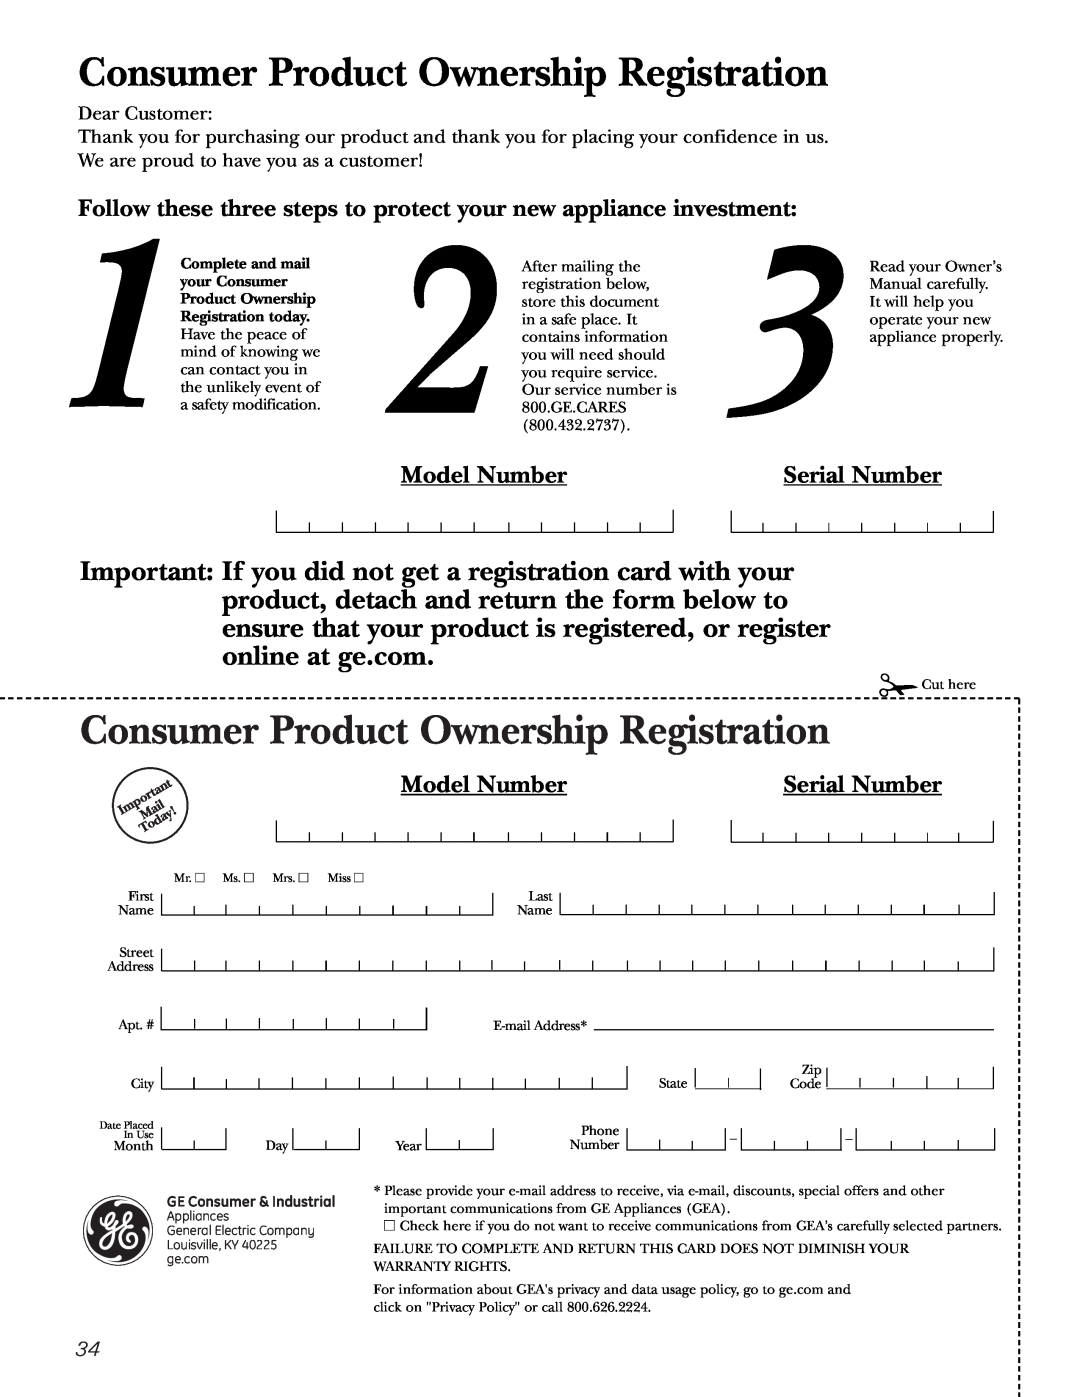 GE 25 and 27 installation instructions Model Number, Serial Number, Consumer Product Ownership Registration 